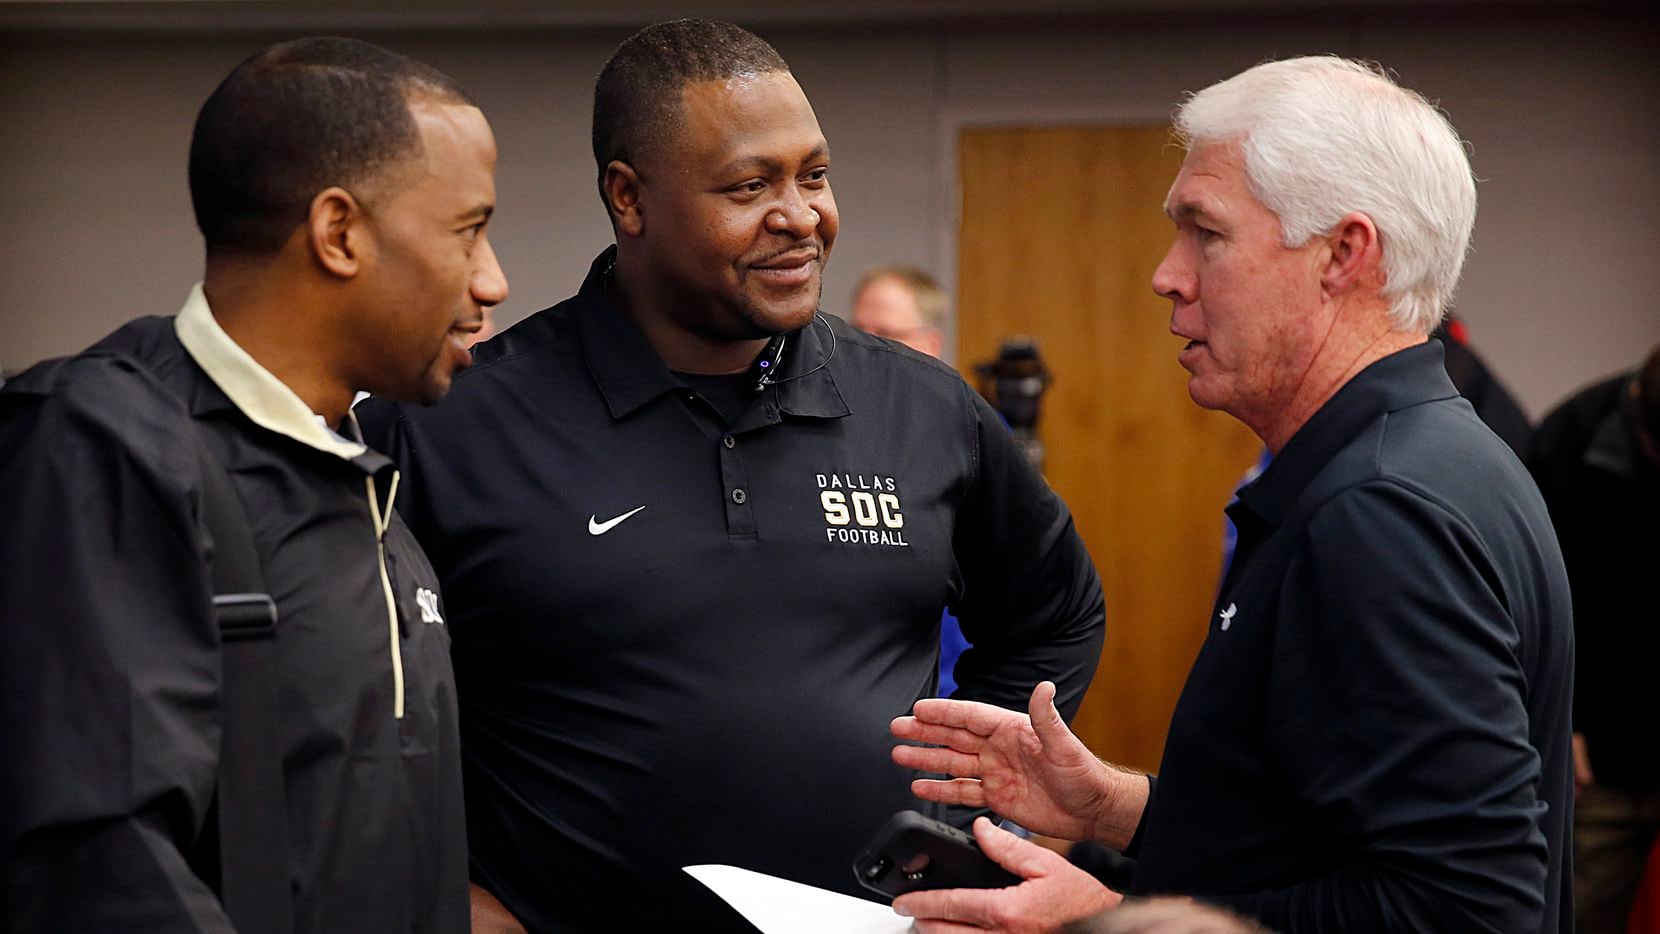 Southlake Carroll head football coach Hal Wasson, right, visits with South Oak Cliff head coach Emmett Jones, left, and assistant Wayne Ingram after the new UIL realignment was announced at Birdville Fine Arts/Athletic Complex in North Richland Hills, Monday, February 3, 2014.